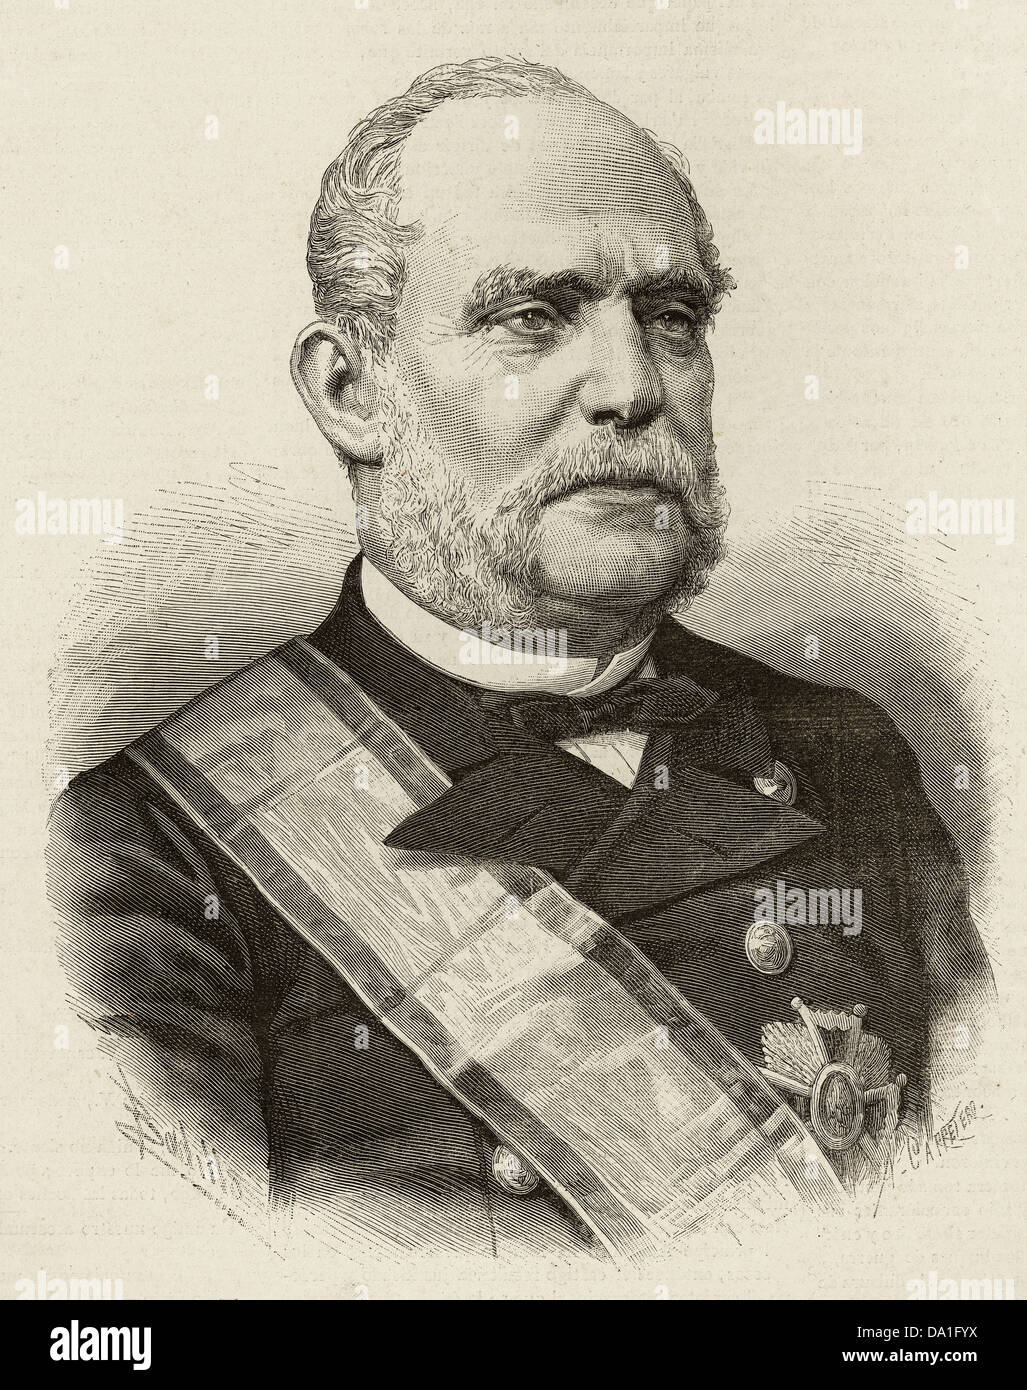 Juan Bautista Topete y Carballo (1821-1885). Spanish naval commander and politician. Engraving. Stock Photo